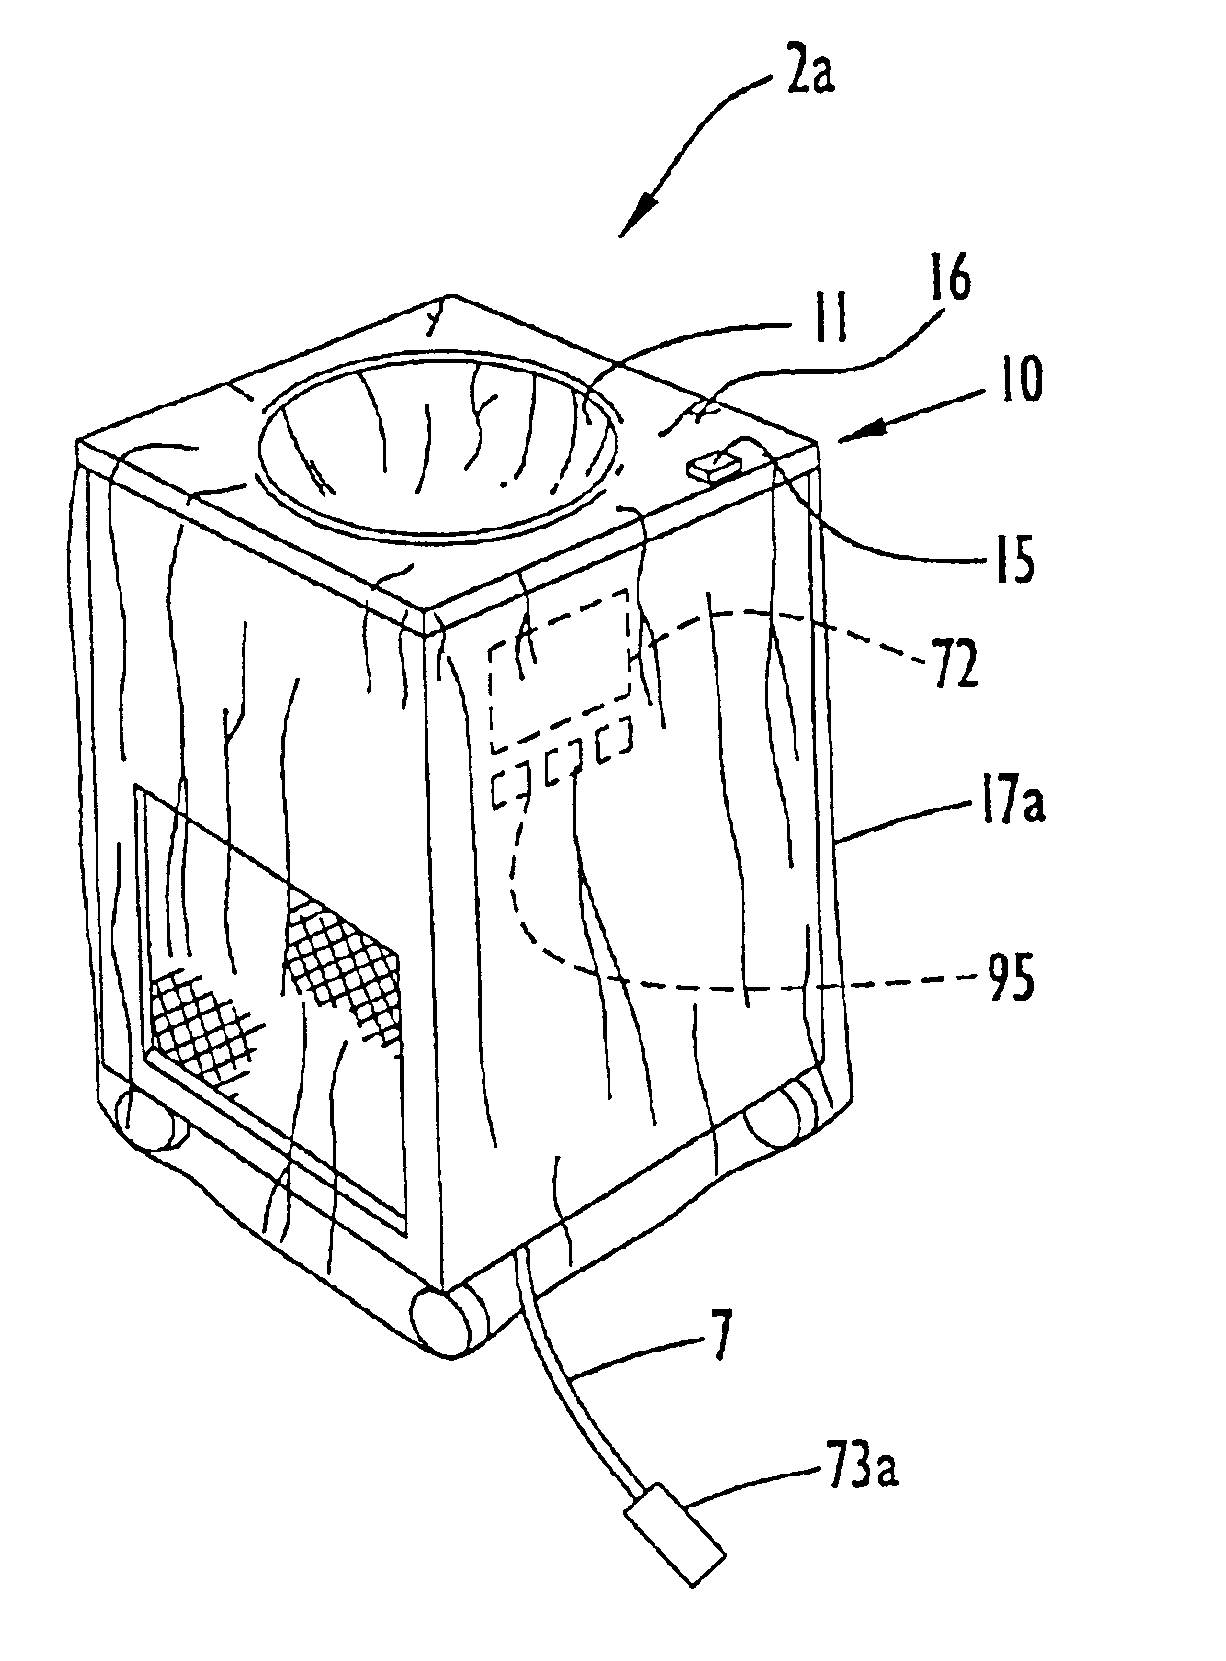 Thermal treatment system and method for controlling the system remotely to thermally treat sterile surgical liquid